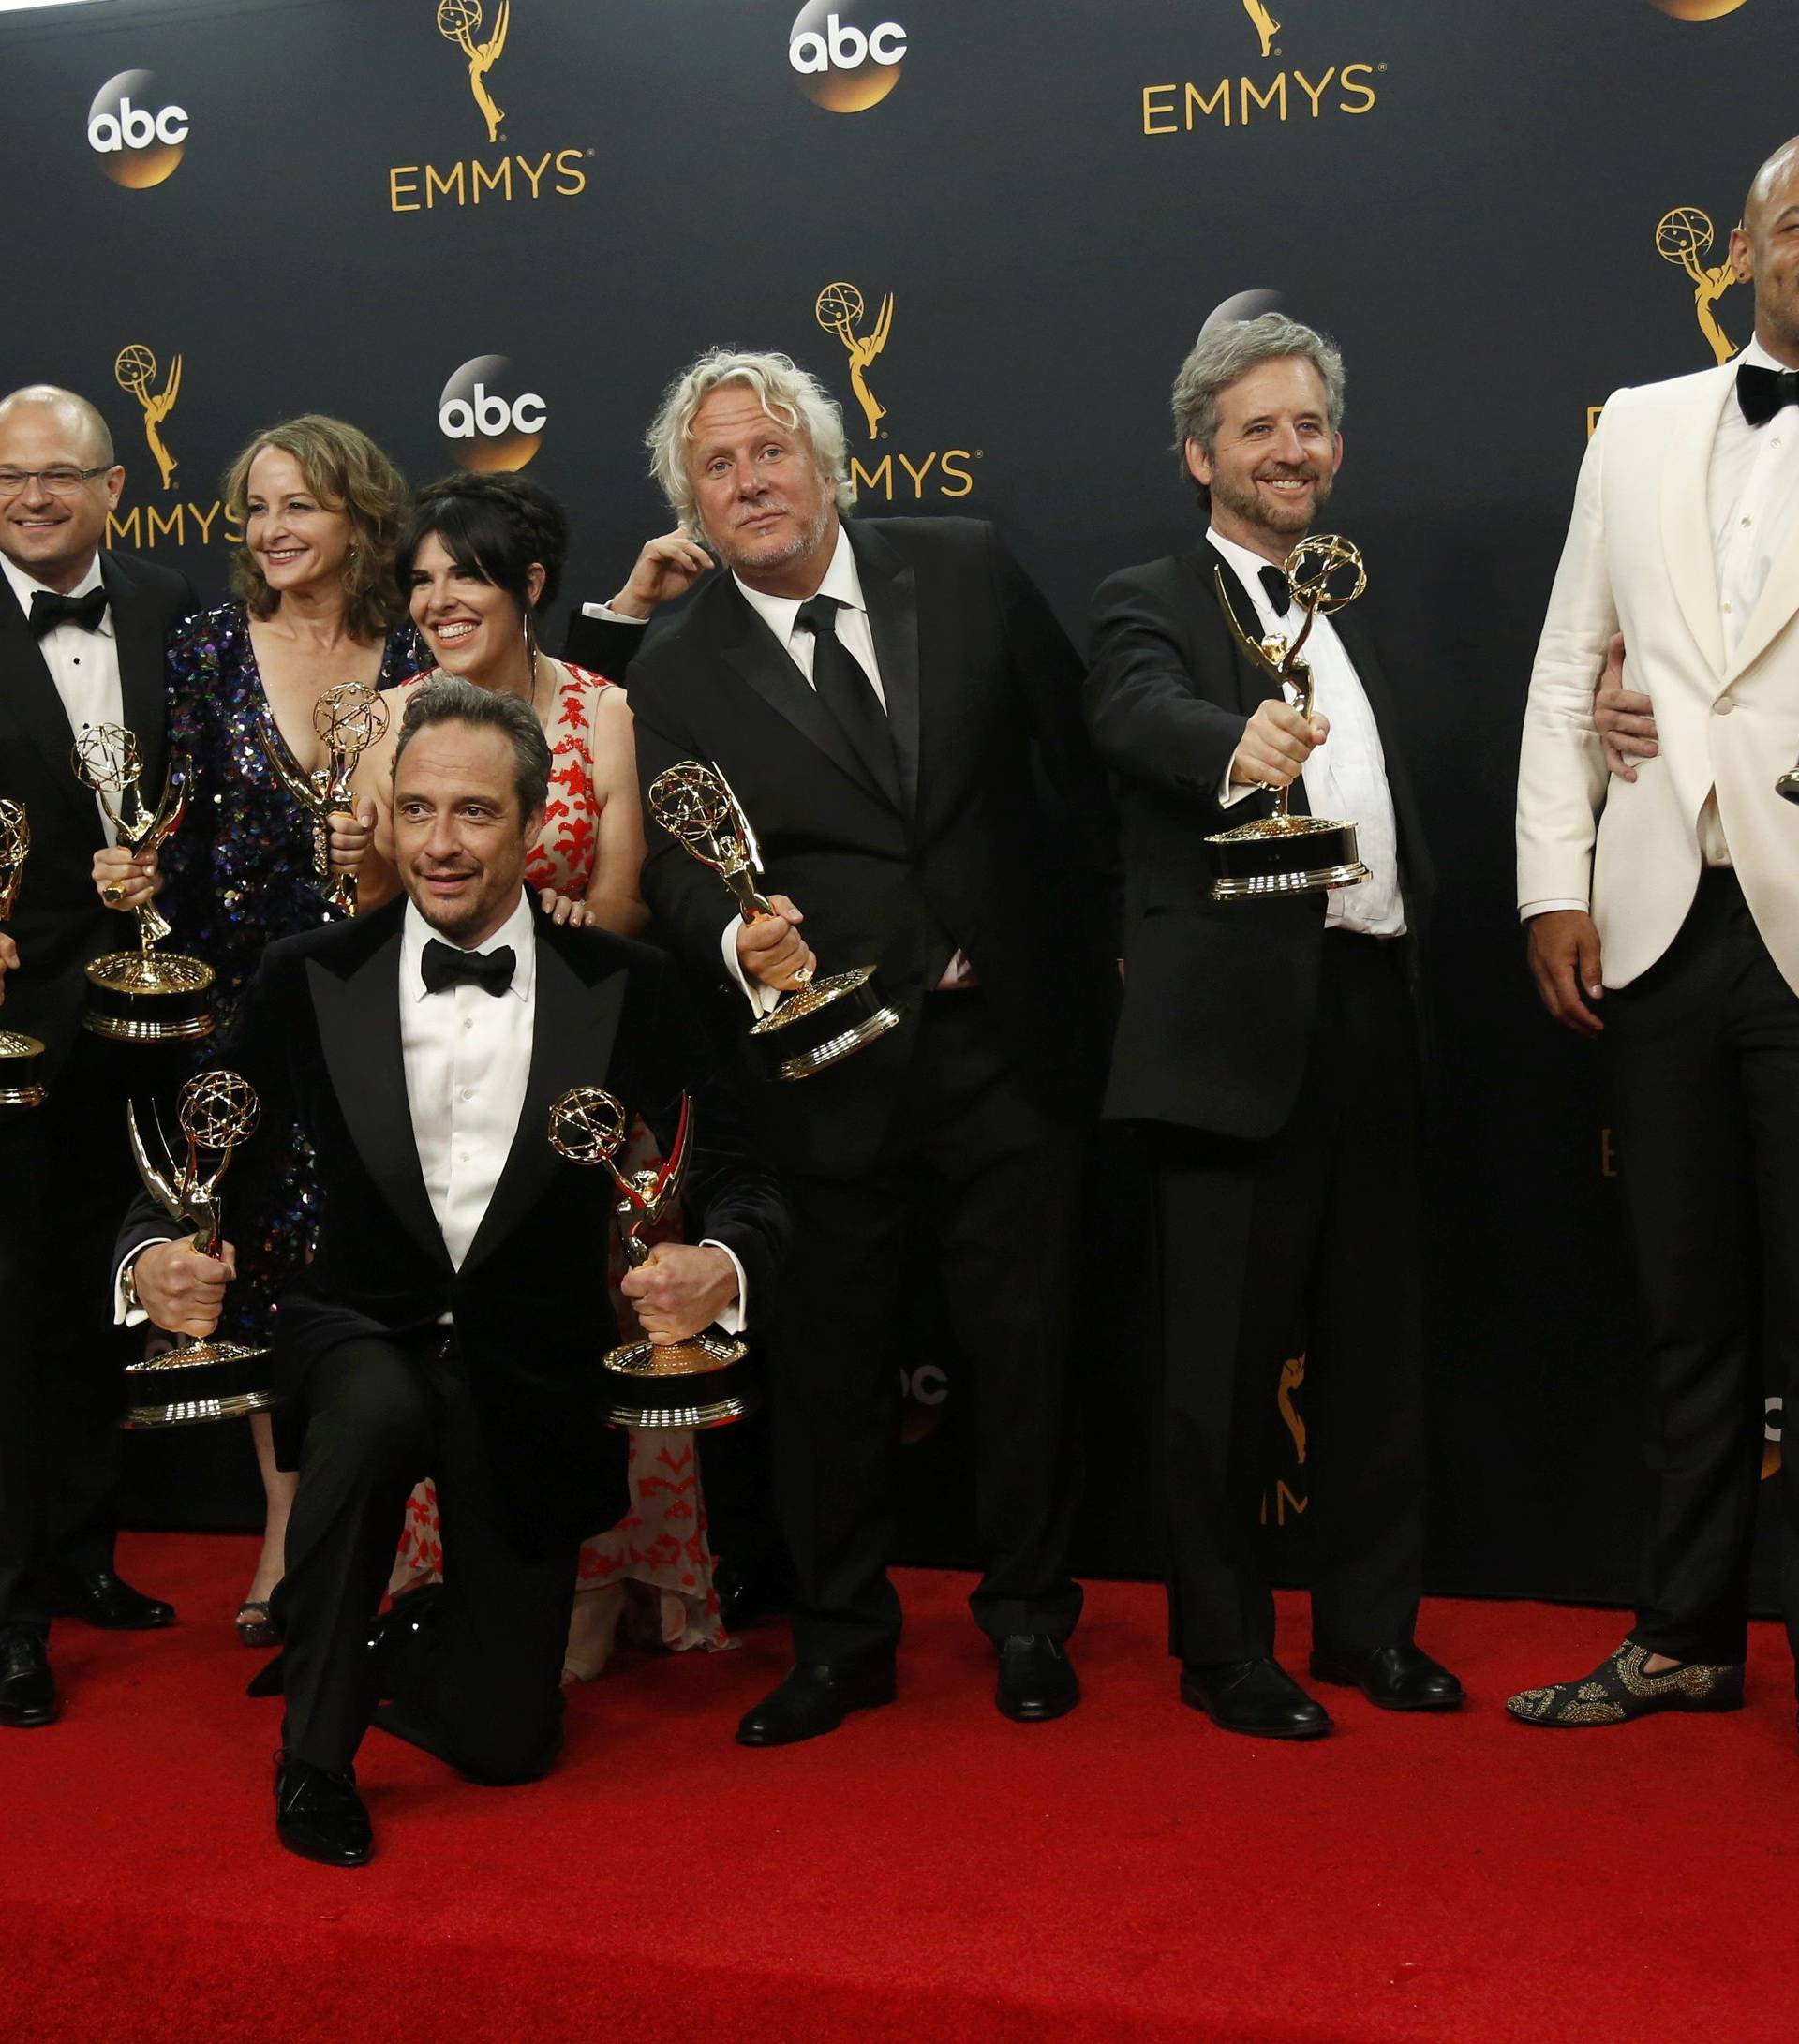 Producer Ryan Murphy poses with cast and crew backstage at the 68th Primetime Emmy Awards in Los Angeles